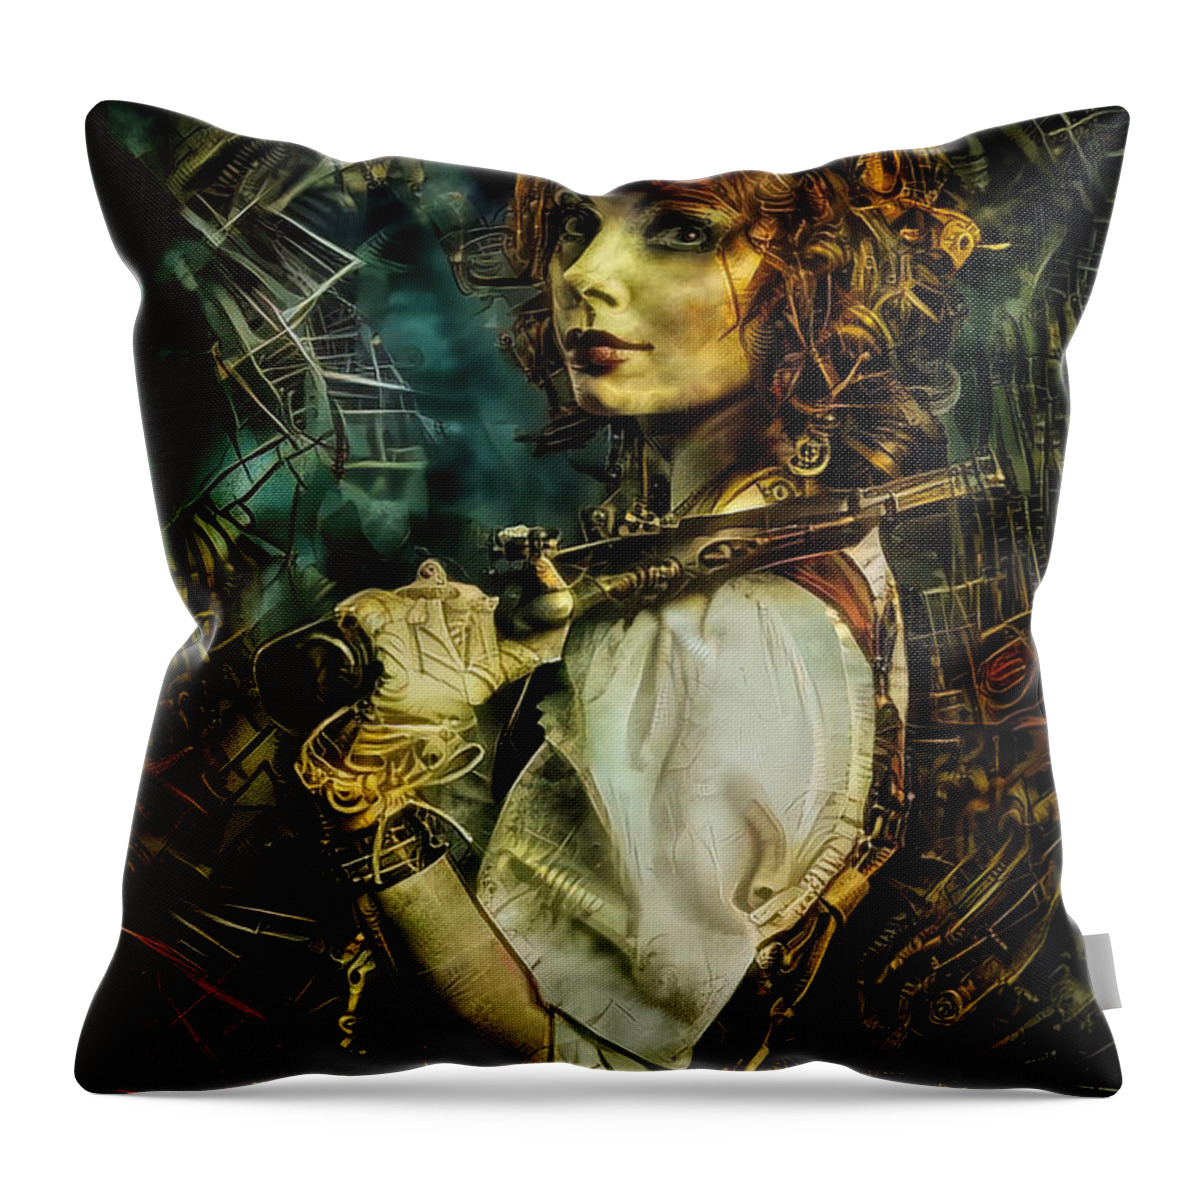 Steampunk Throw Pillow featuring the mixed media Facilitatress by Lilia S